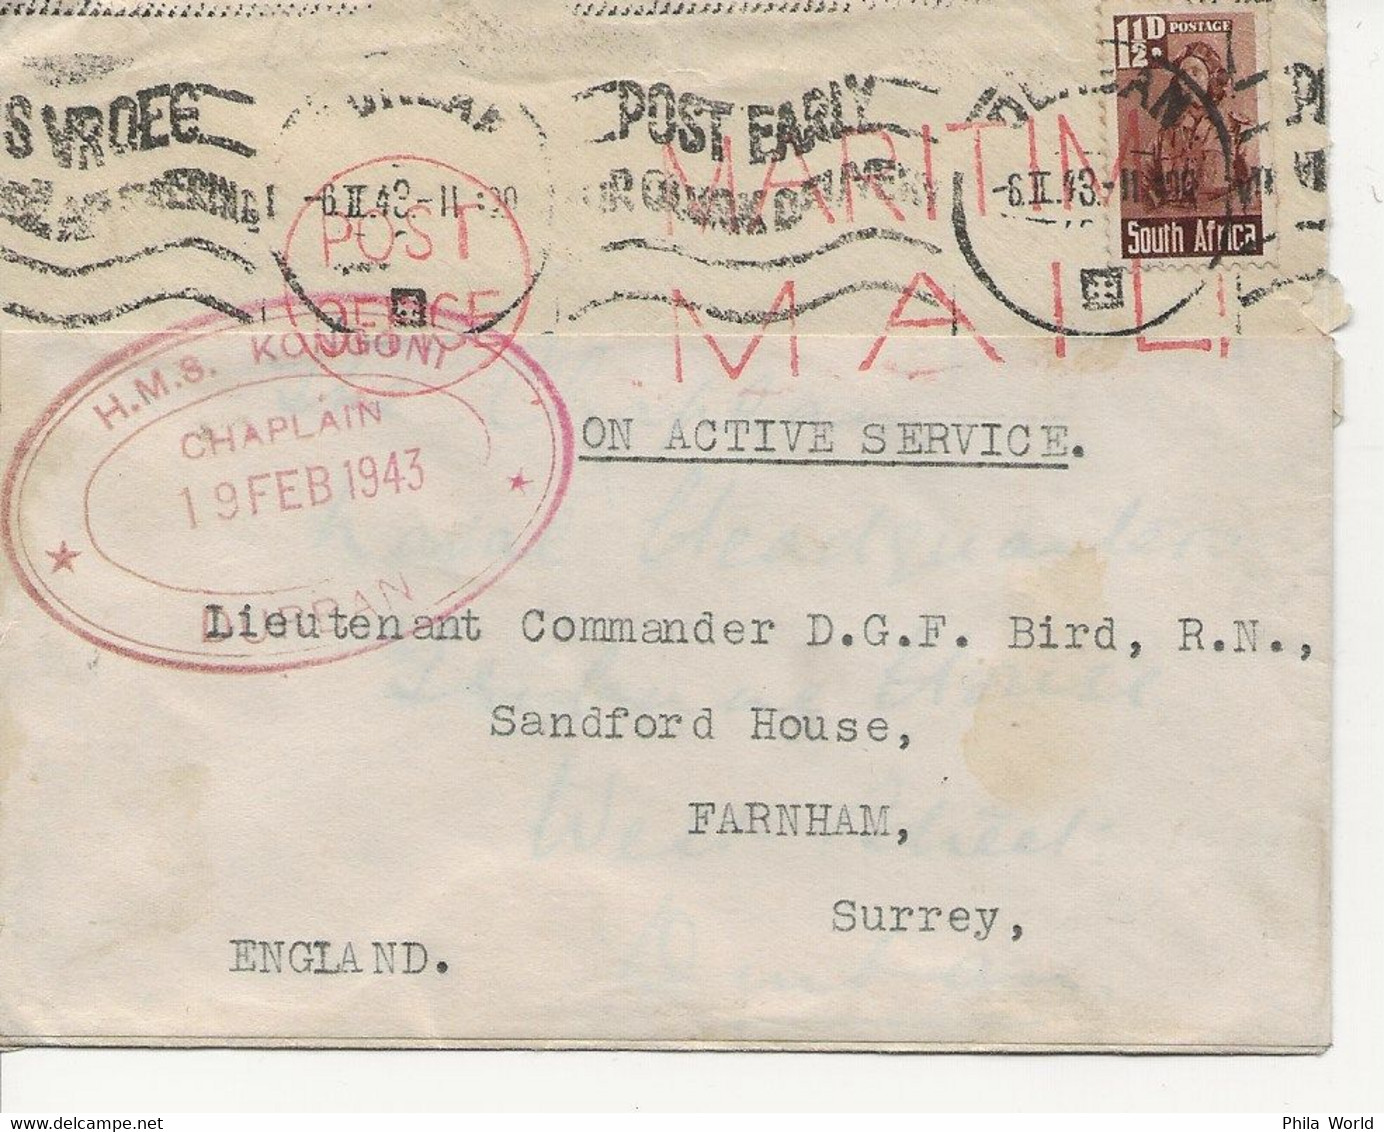 WW2 MARITIME MAIL 1943 LOCAL LETTER  POSTMARKED To The CHAPLAIN NAVAL HEAD QUARTERS DURBAN READDRESSED To ENGLAND - Schiffe